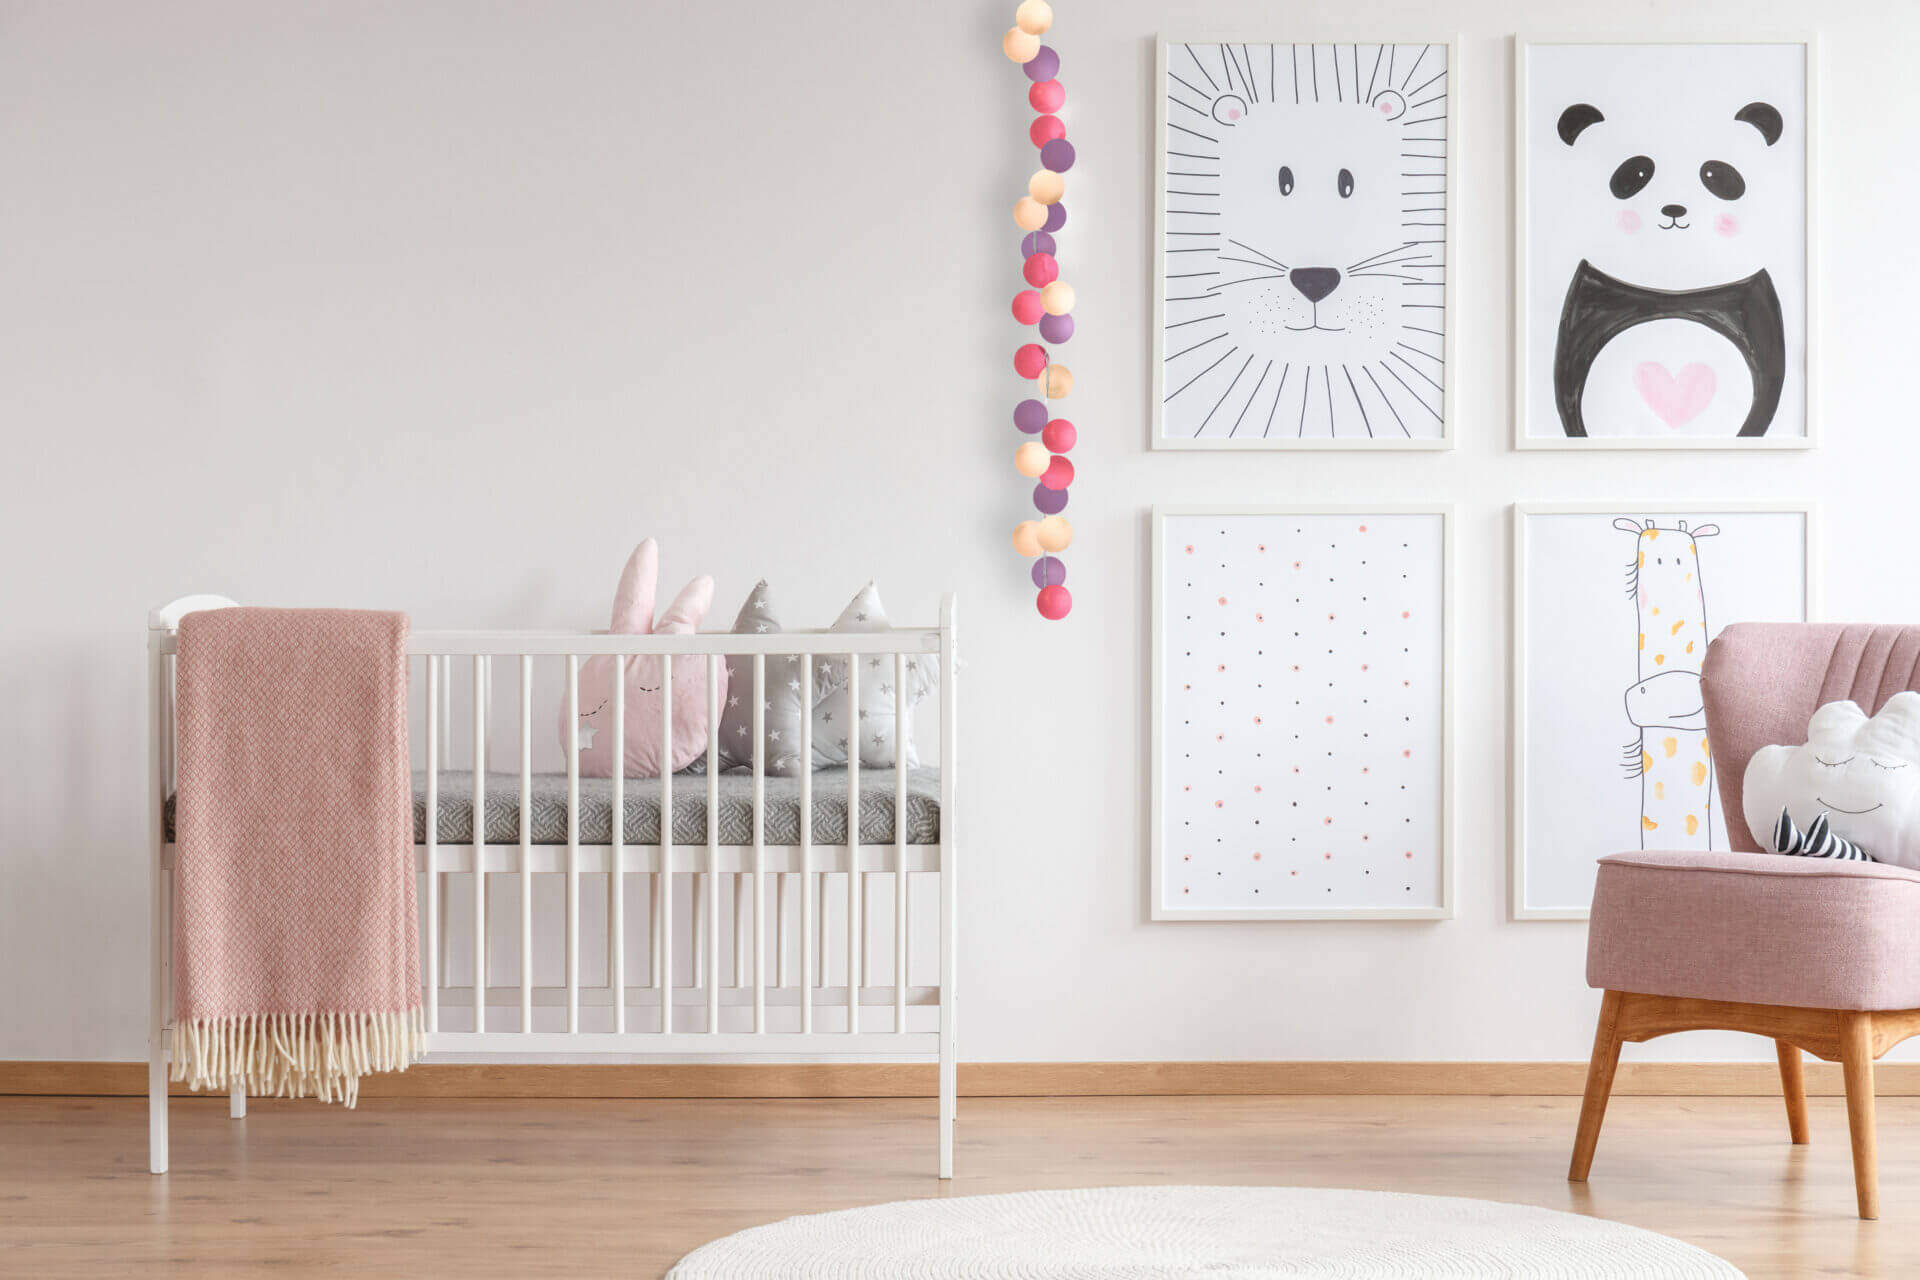 White crib with pink blanket and decorative cushions standing in cute baby room with posters